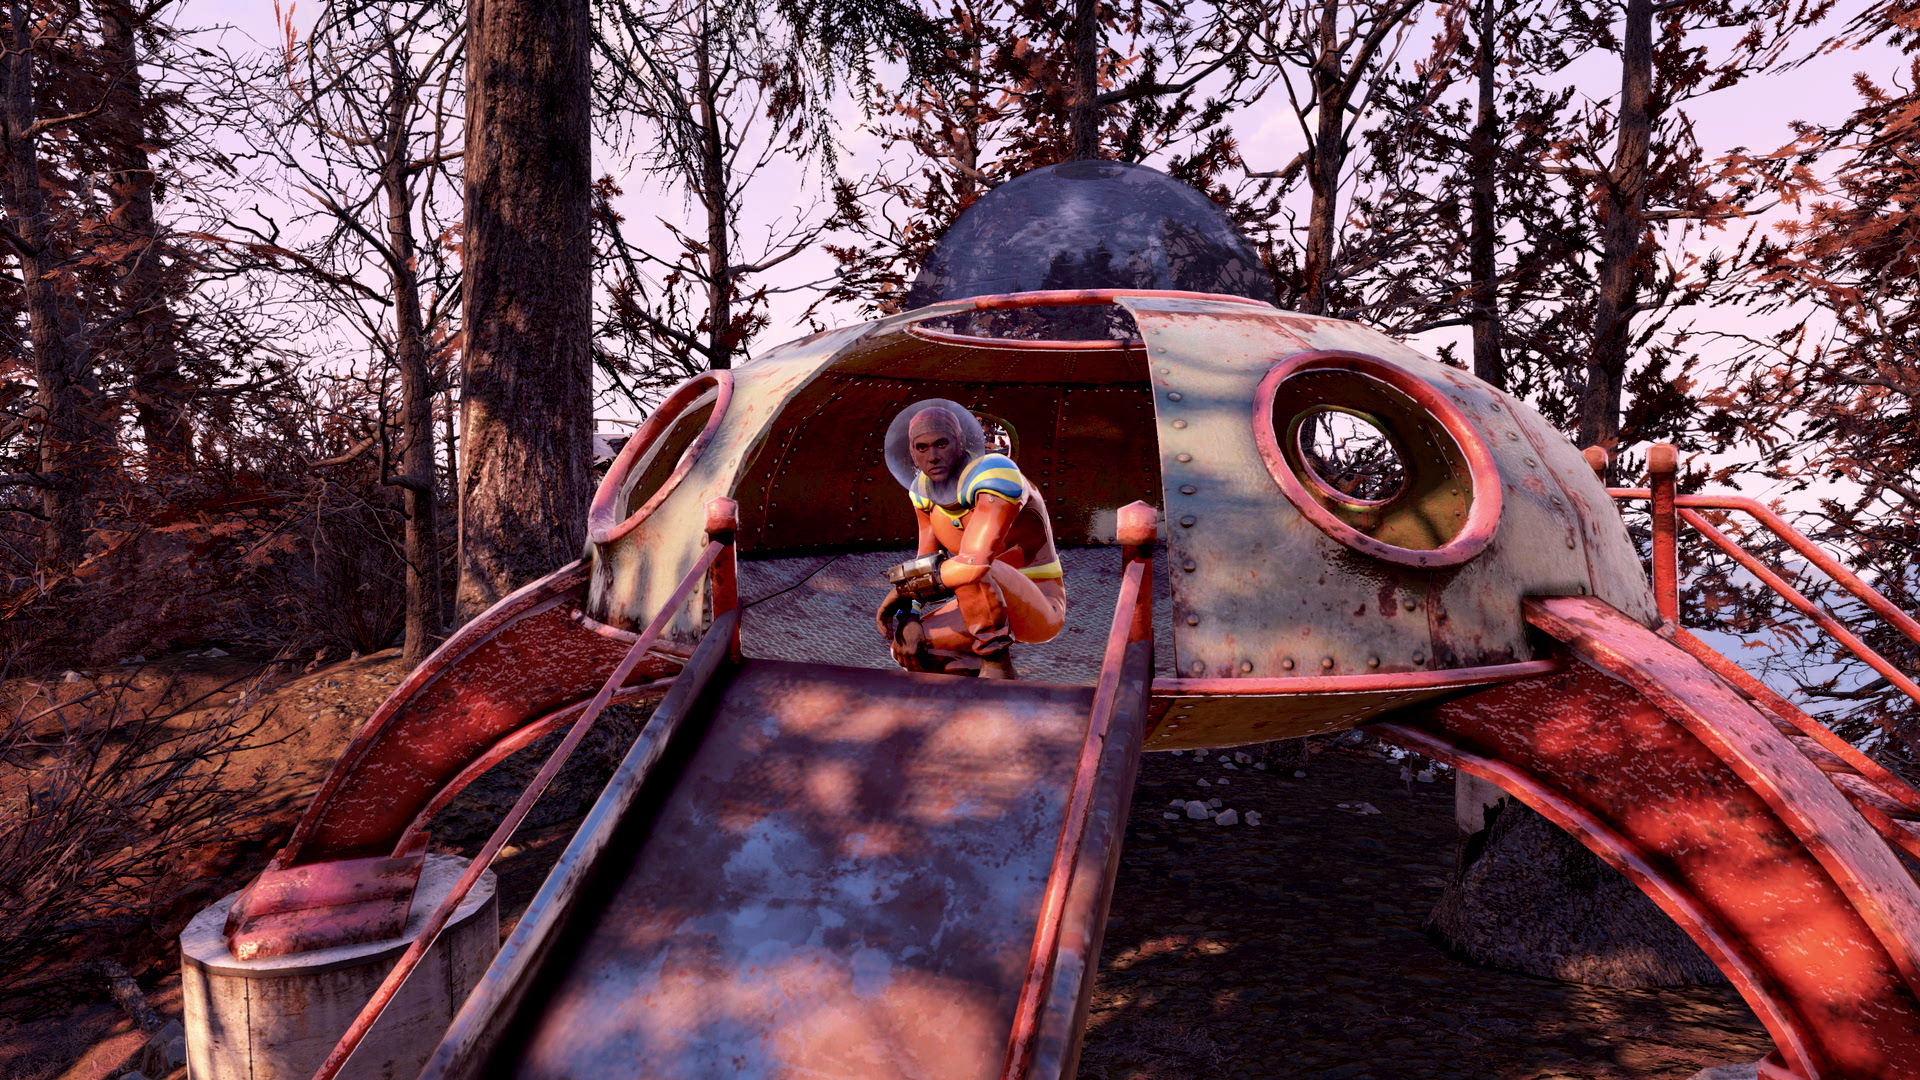 UFO Playscape